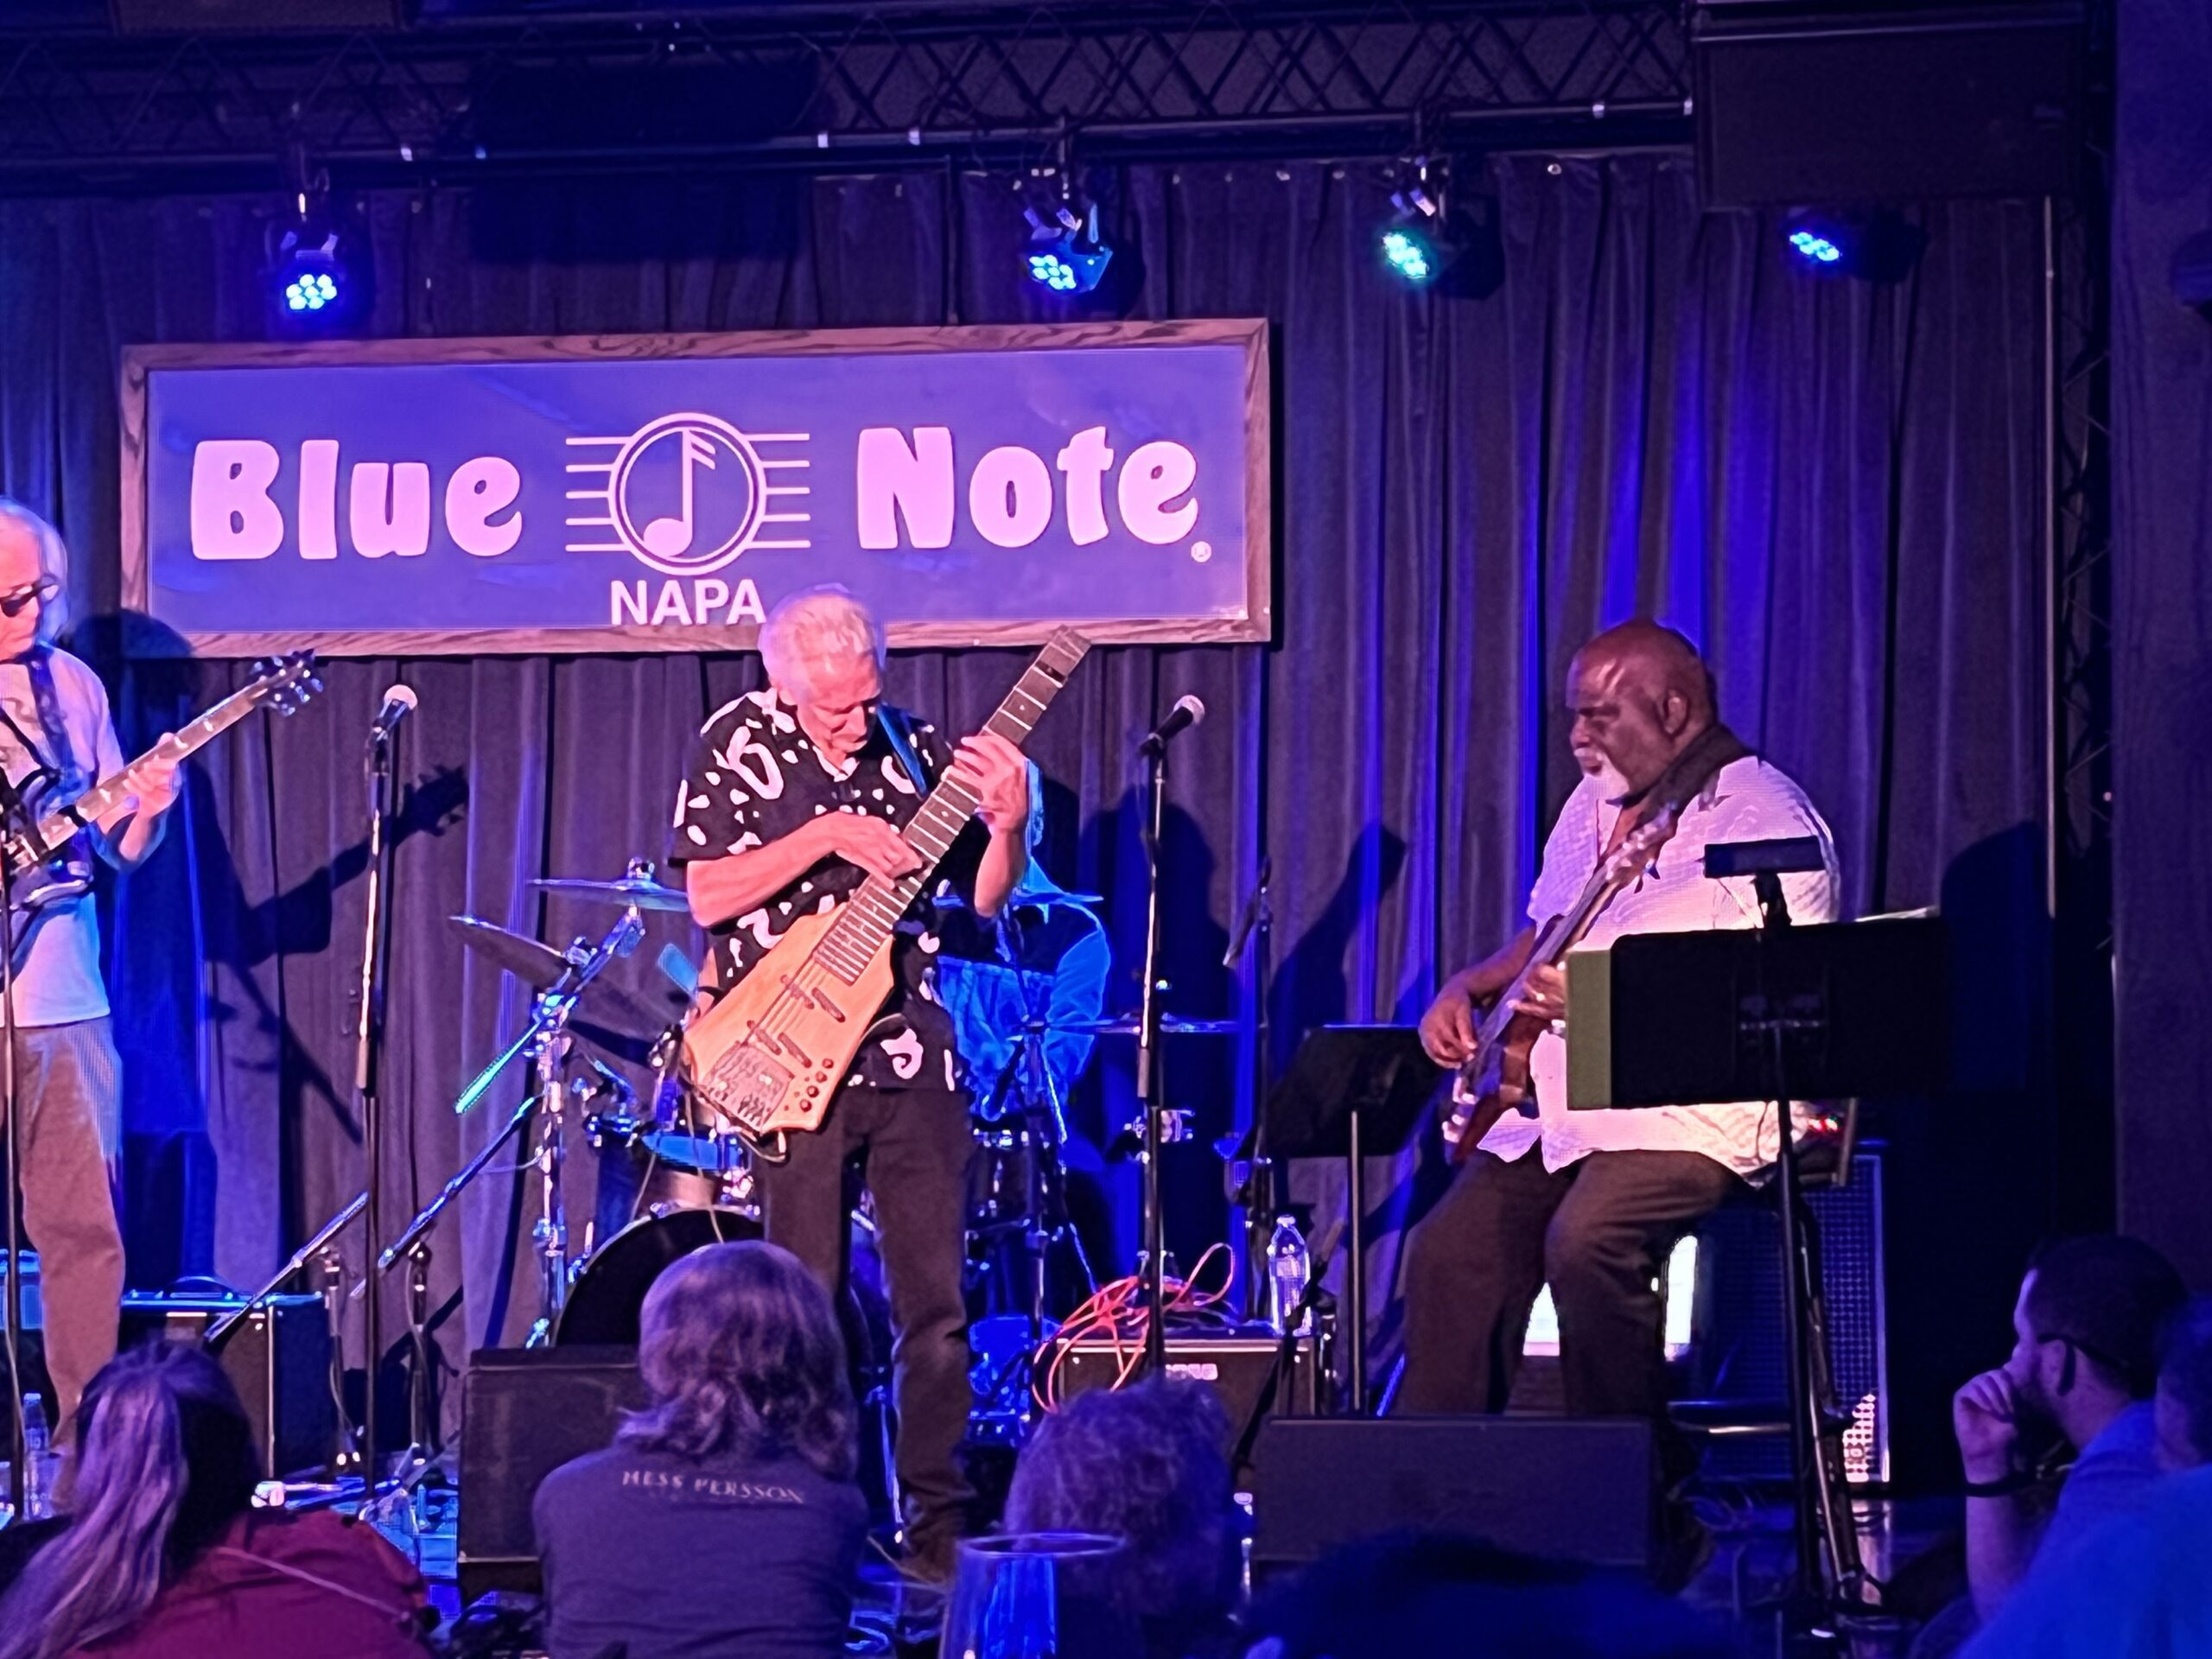 Blue Note performance